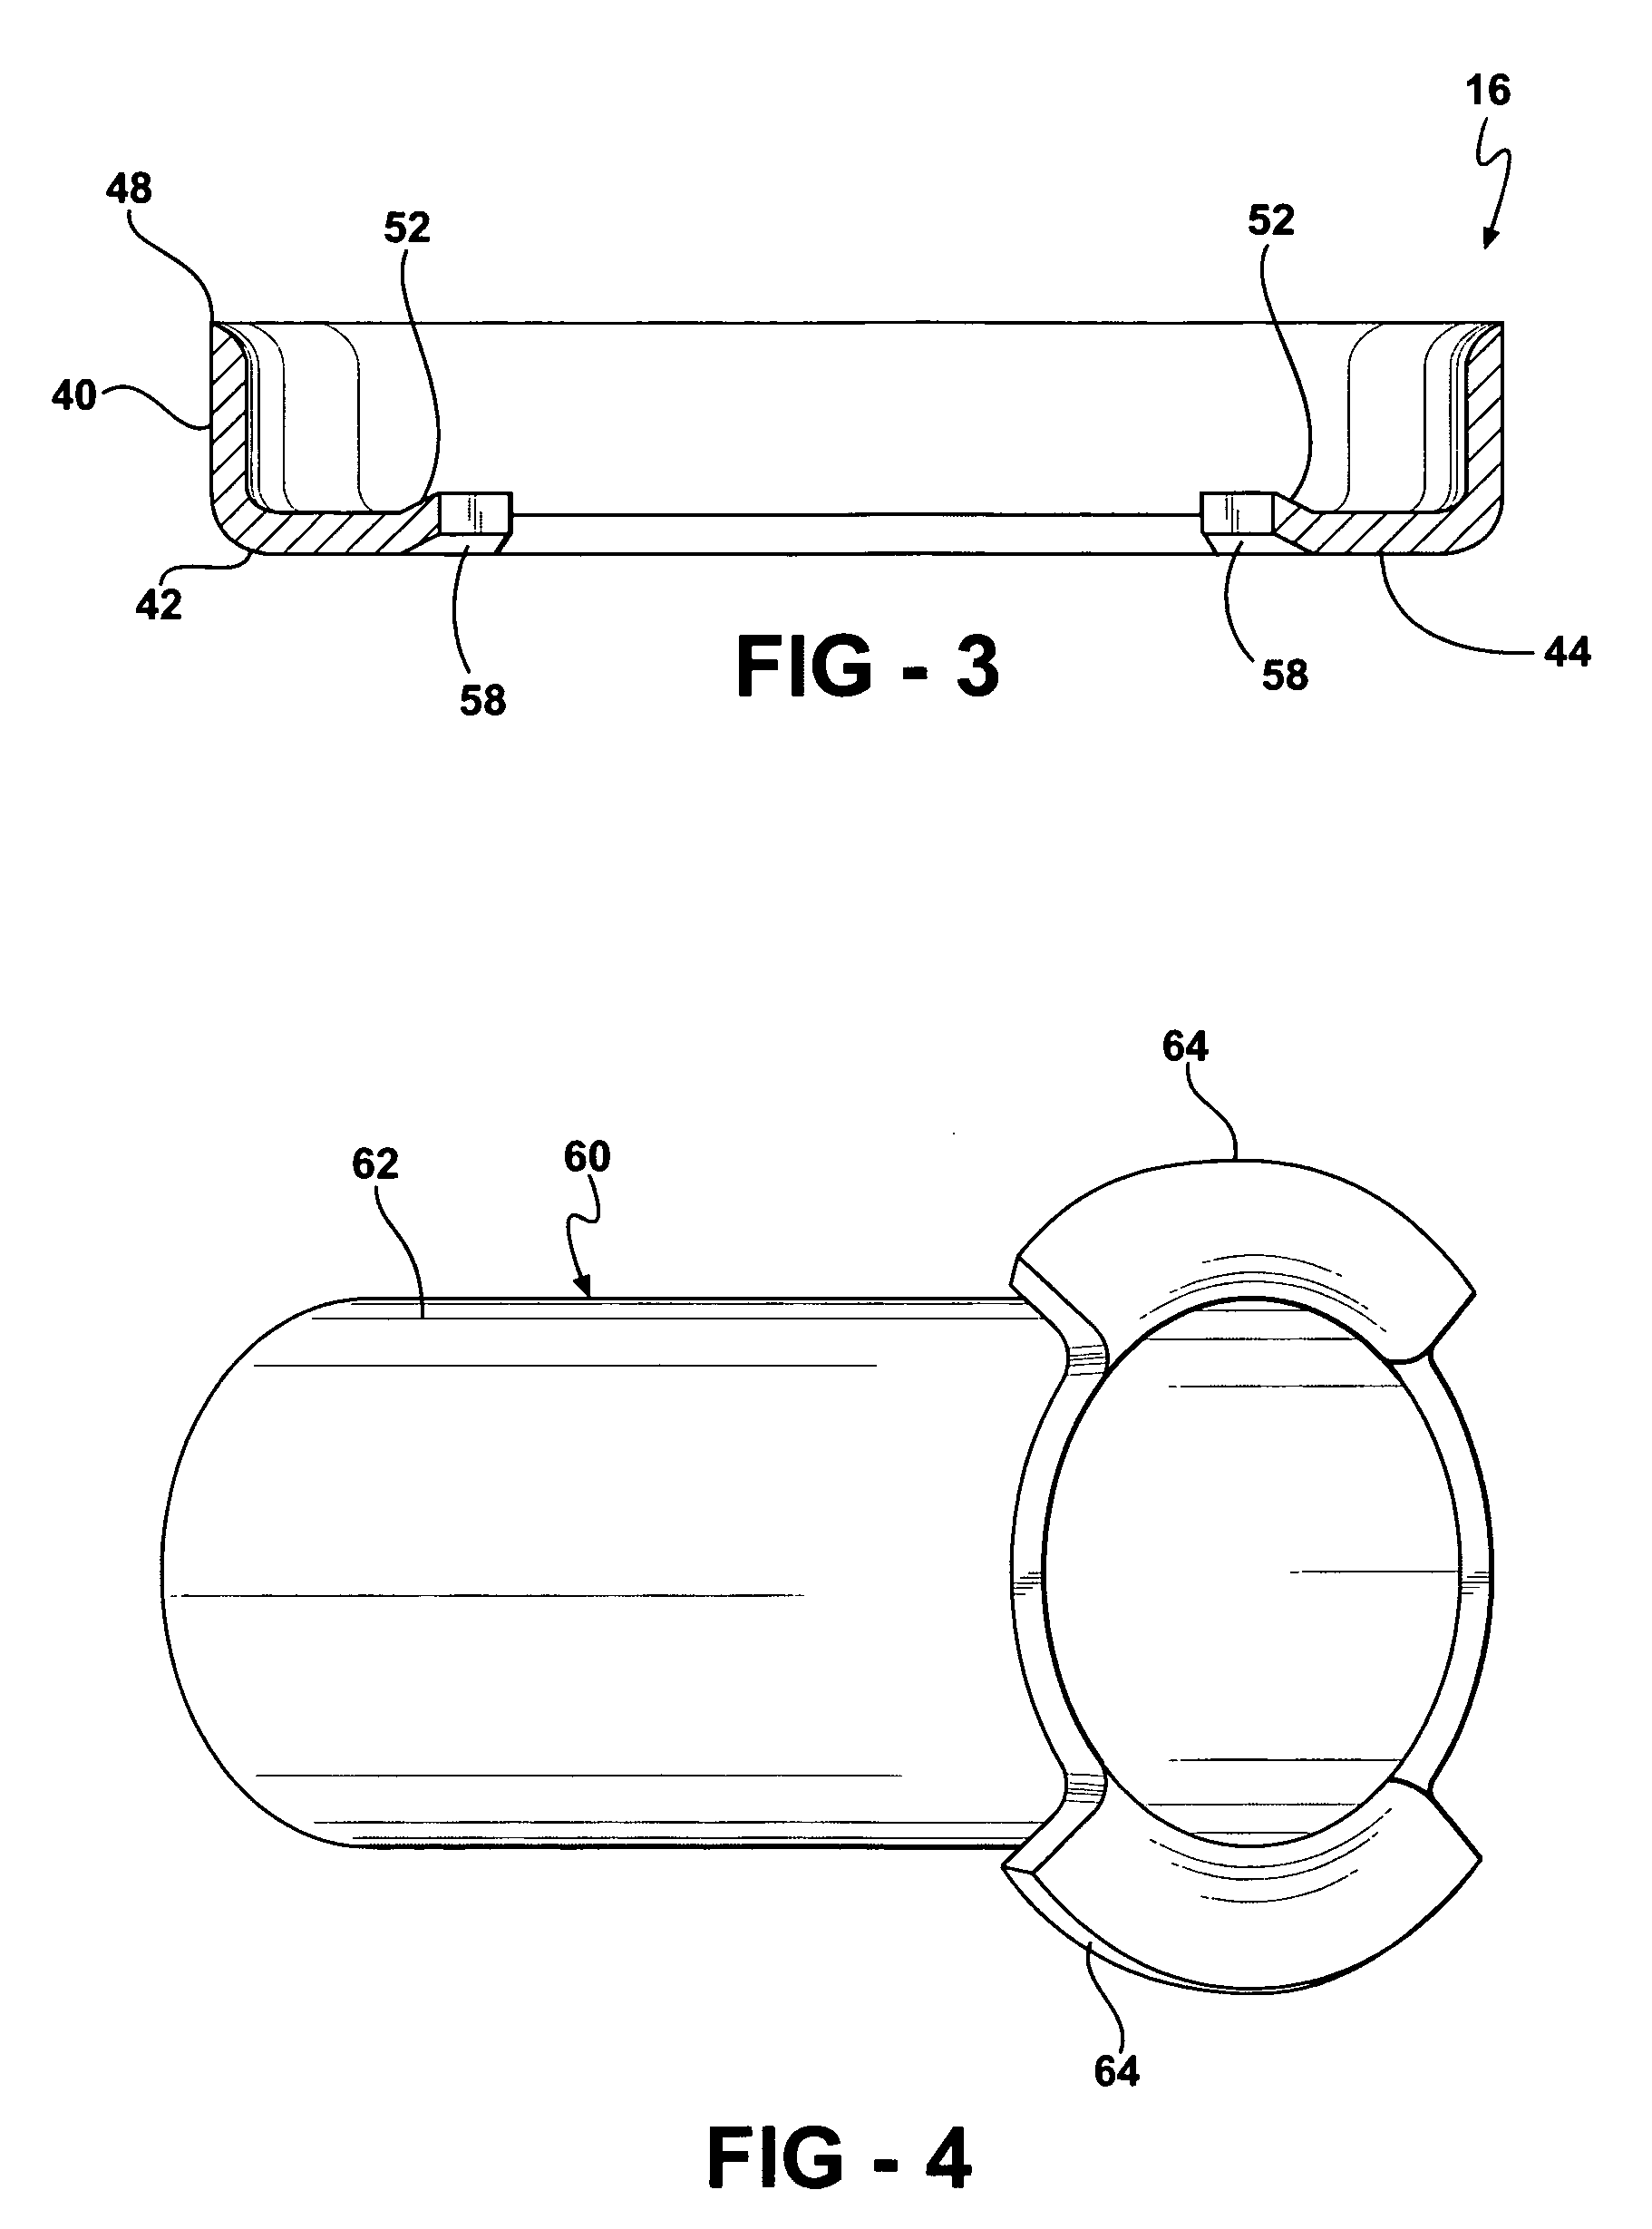 Shaft seal having integrated removal feature